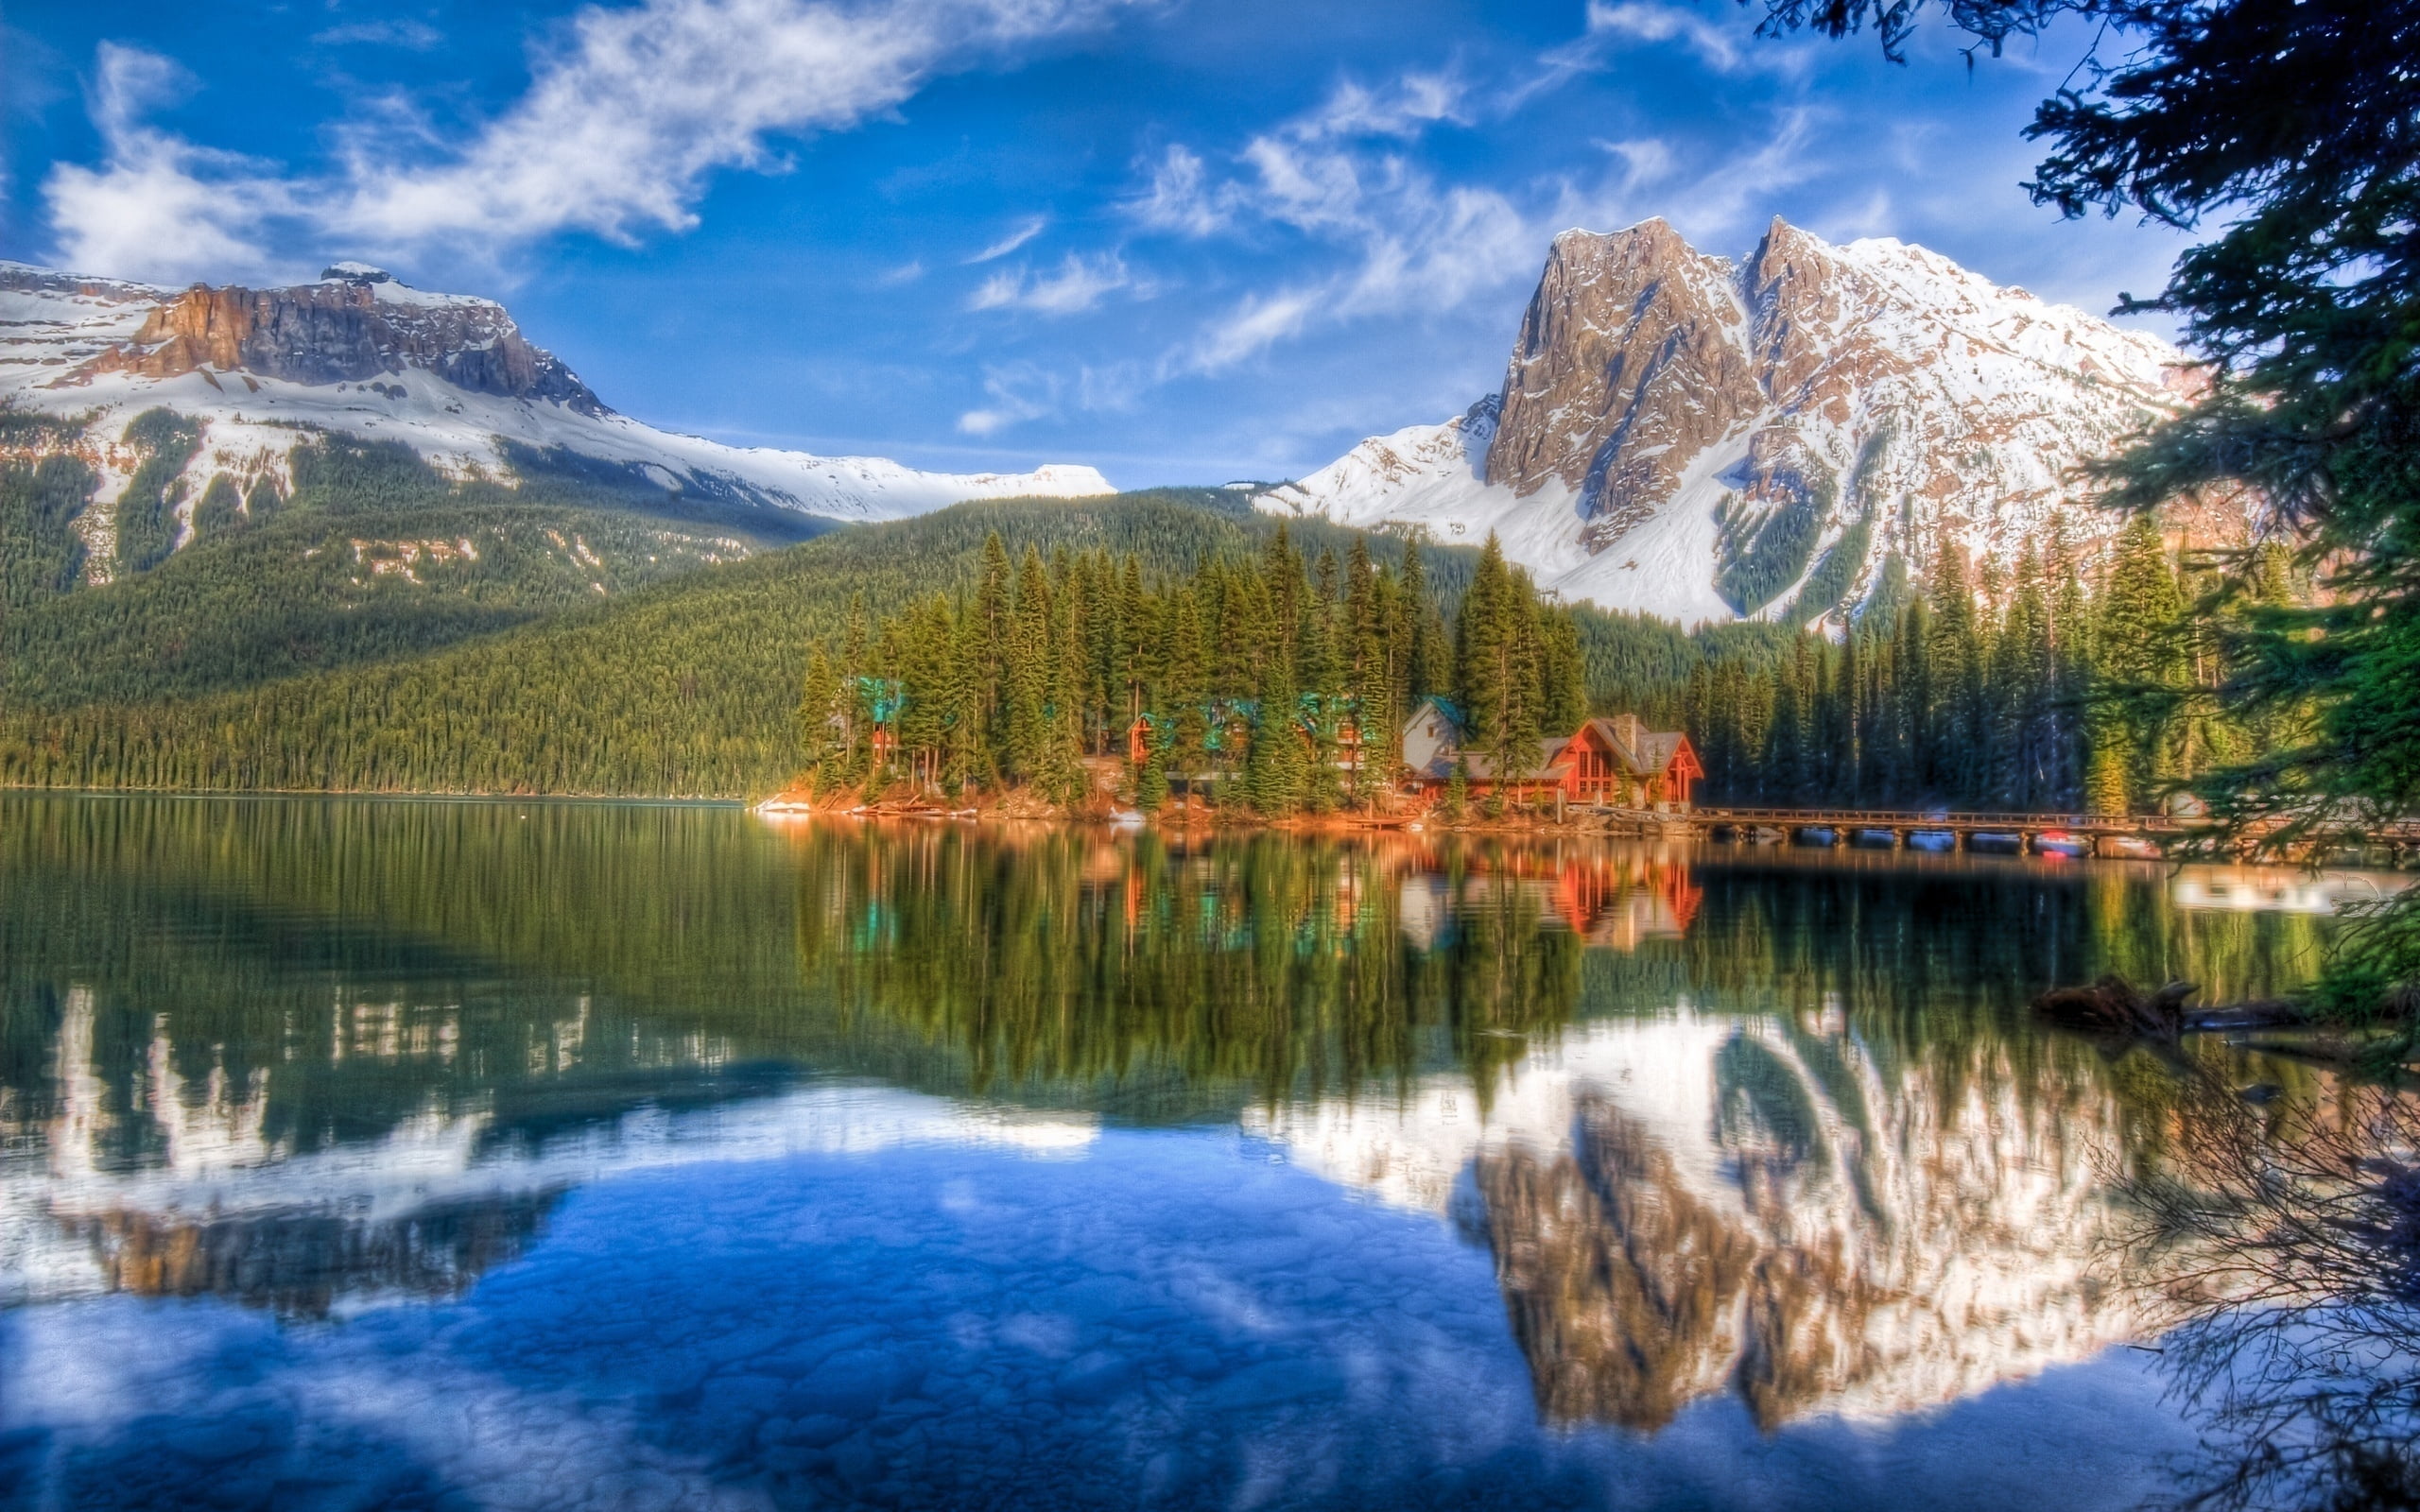 calm body of water near pine trees and mountains during daytime photograph